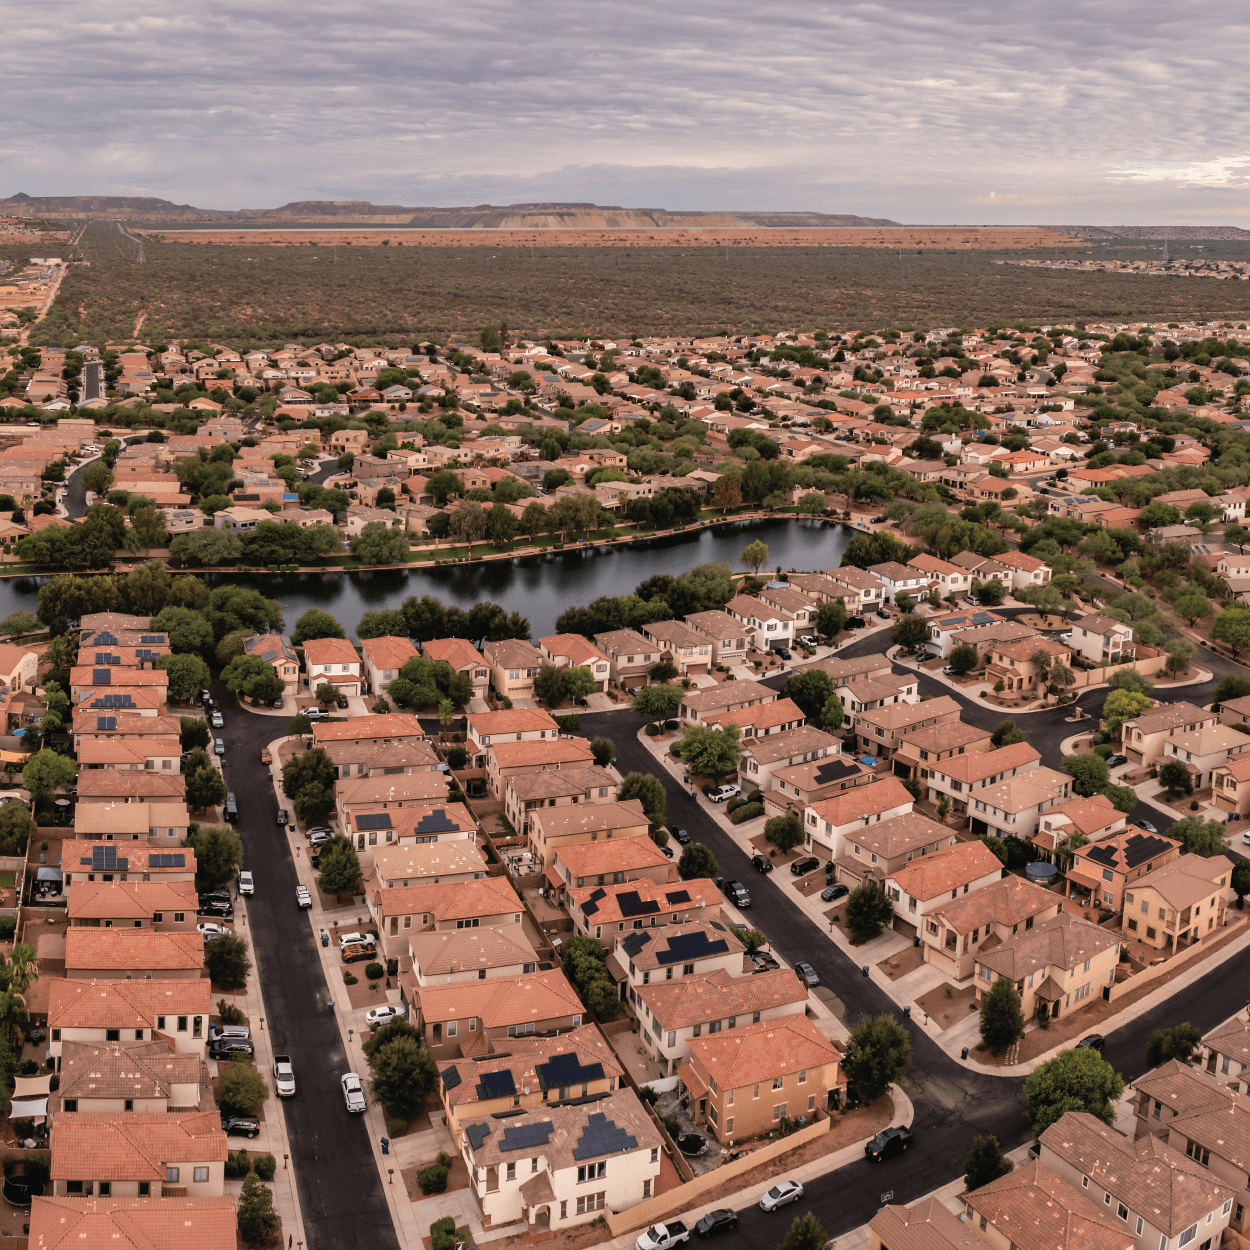 Aerial view of dense neighborhoods with a body of water in the middle